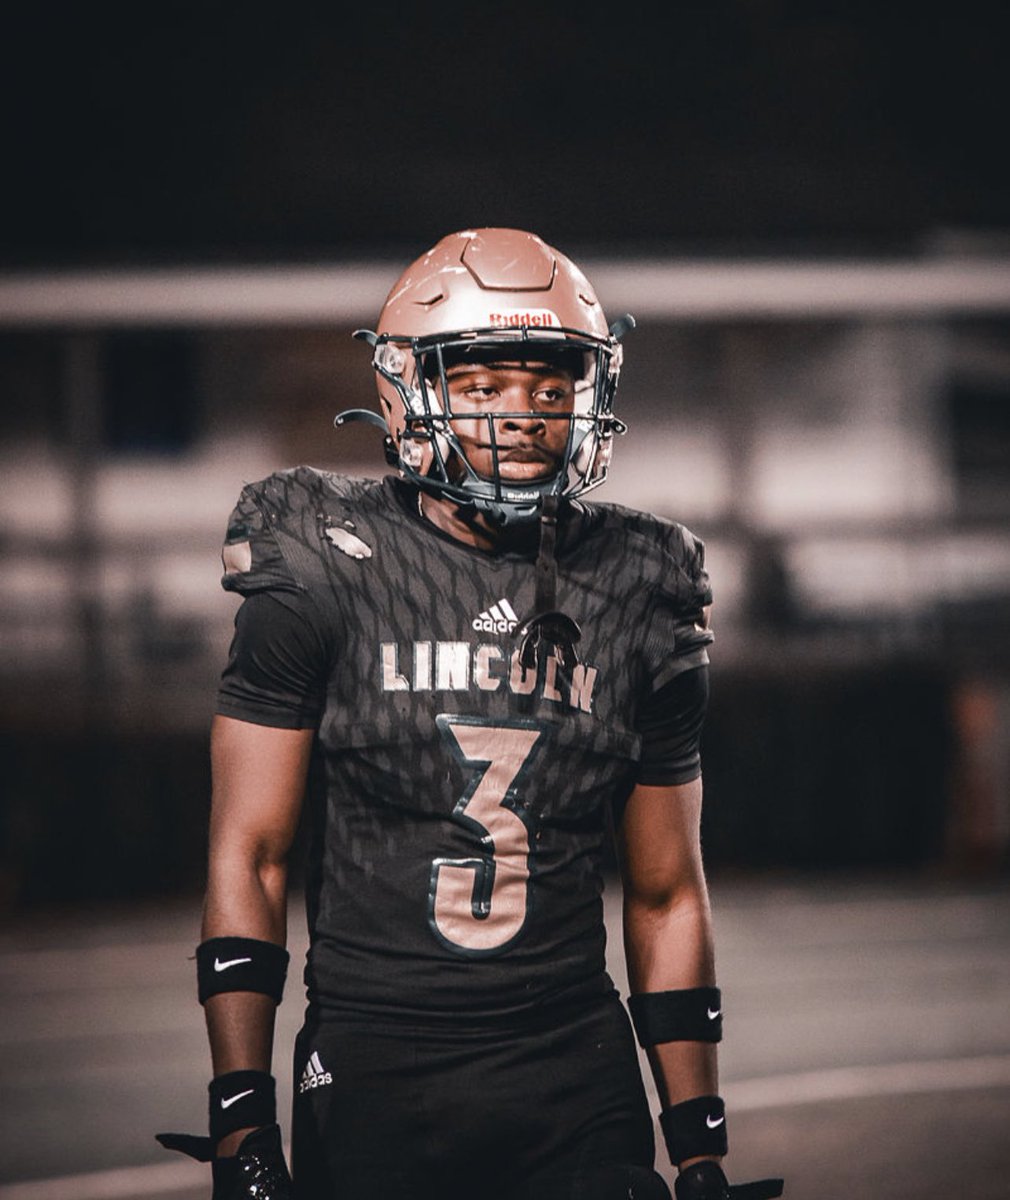 Junior Szn [hudl.com/v/2MaWv9] •20 mph Catapult •District Champ •Allowed 0 Td’s • Top 5 db in classification •All-around Athlete •CERTIFIED DAWG!! @CoachC_Collins @CoachGasparato @ChrisWeinke16 @ScottieGraham @_CoachThacker @ErnieSims34 @Coach_Shugg @CoachMcNamara9